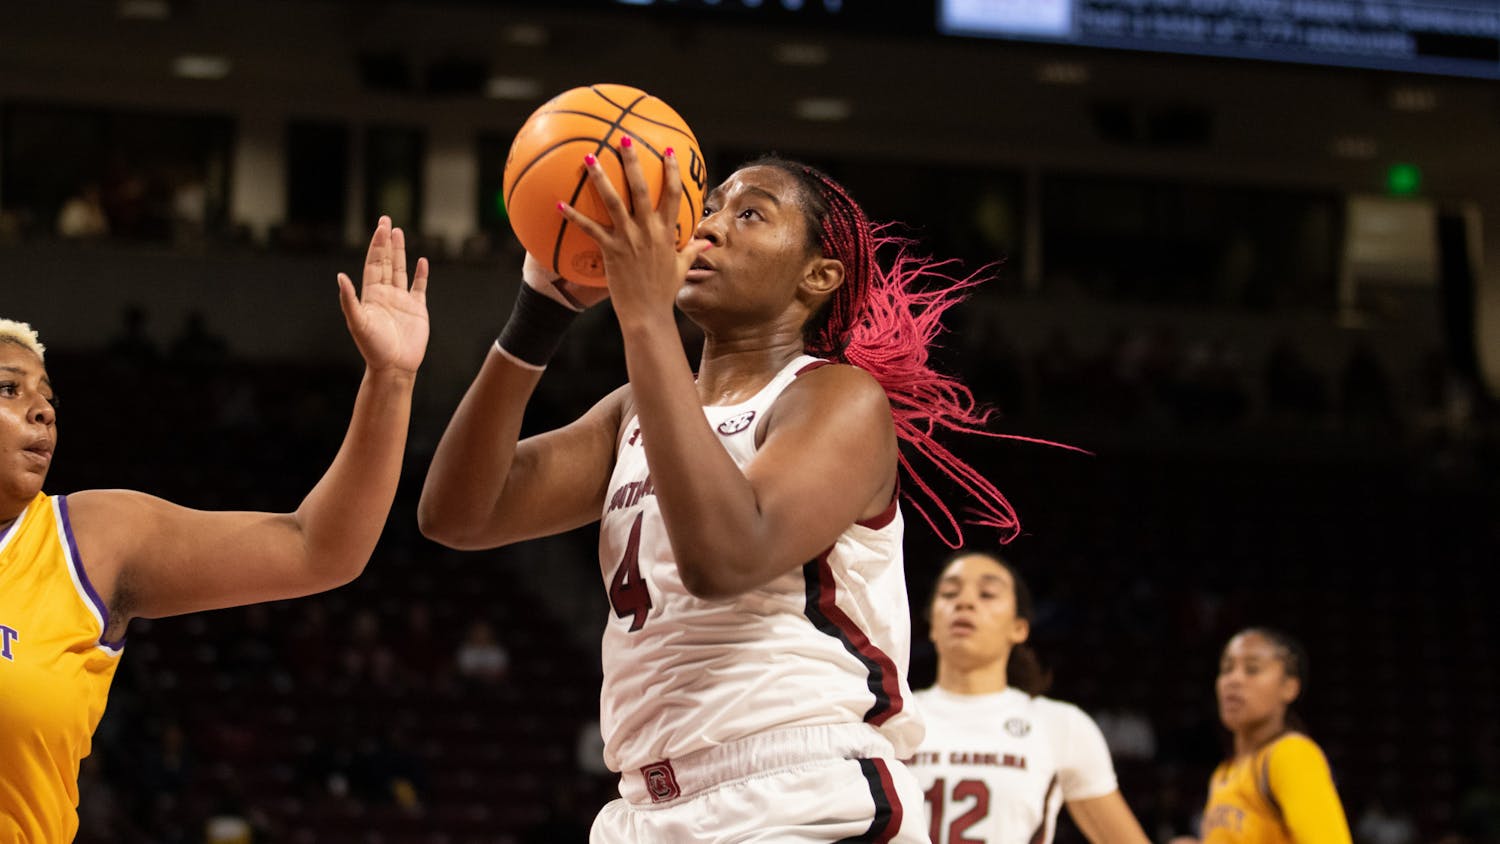 Senior forward Aliyah Boston holds the ball above her head and away from the player from Benedict College during the exhibition game at Colonial Life Arena on Oct. 31, 2022. South Carolina beat the Benedict Tigers in dominant fashion 123-32.